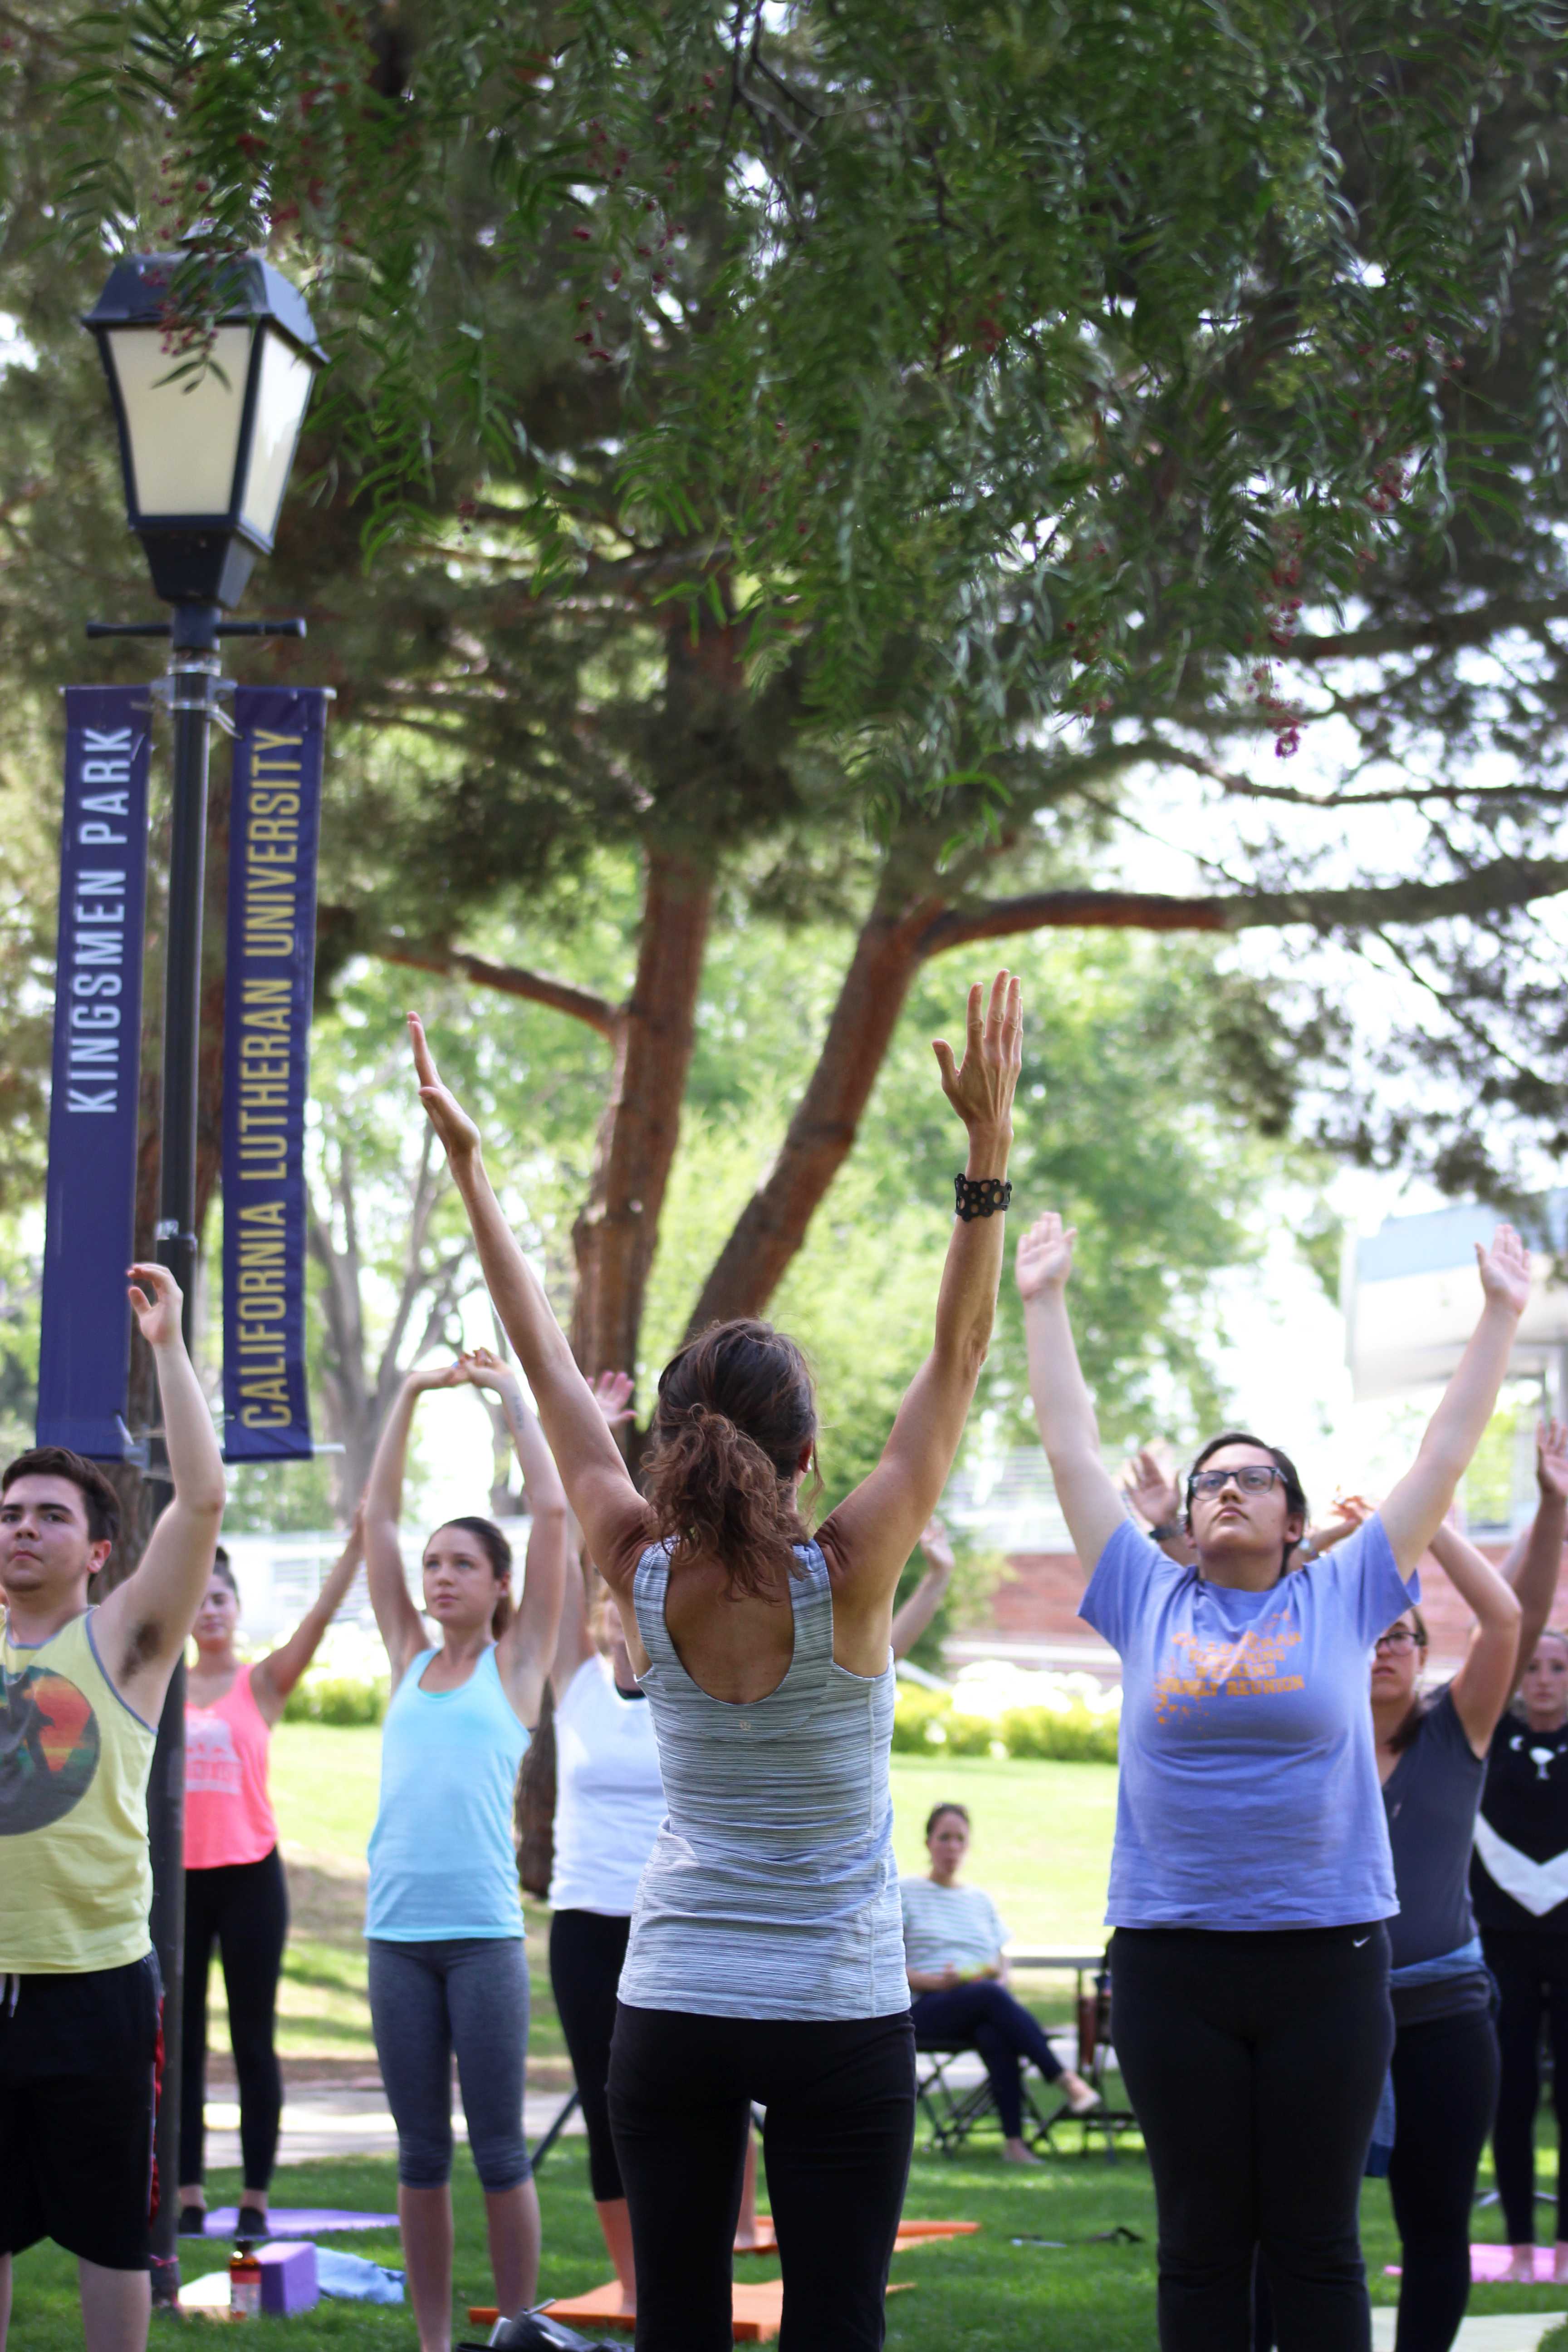 Professor Lyons’ class gathers for yoga in the park, an event put on by Student Life to celebrate Green Week. Photo by Amanda Marston - Staff Photographer